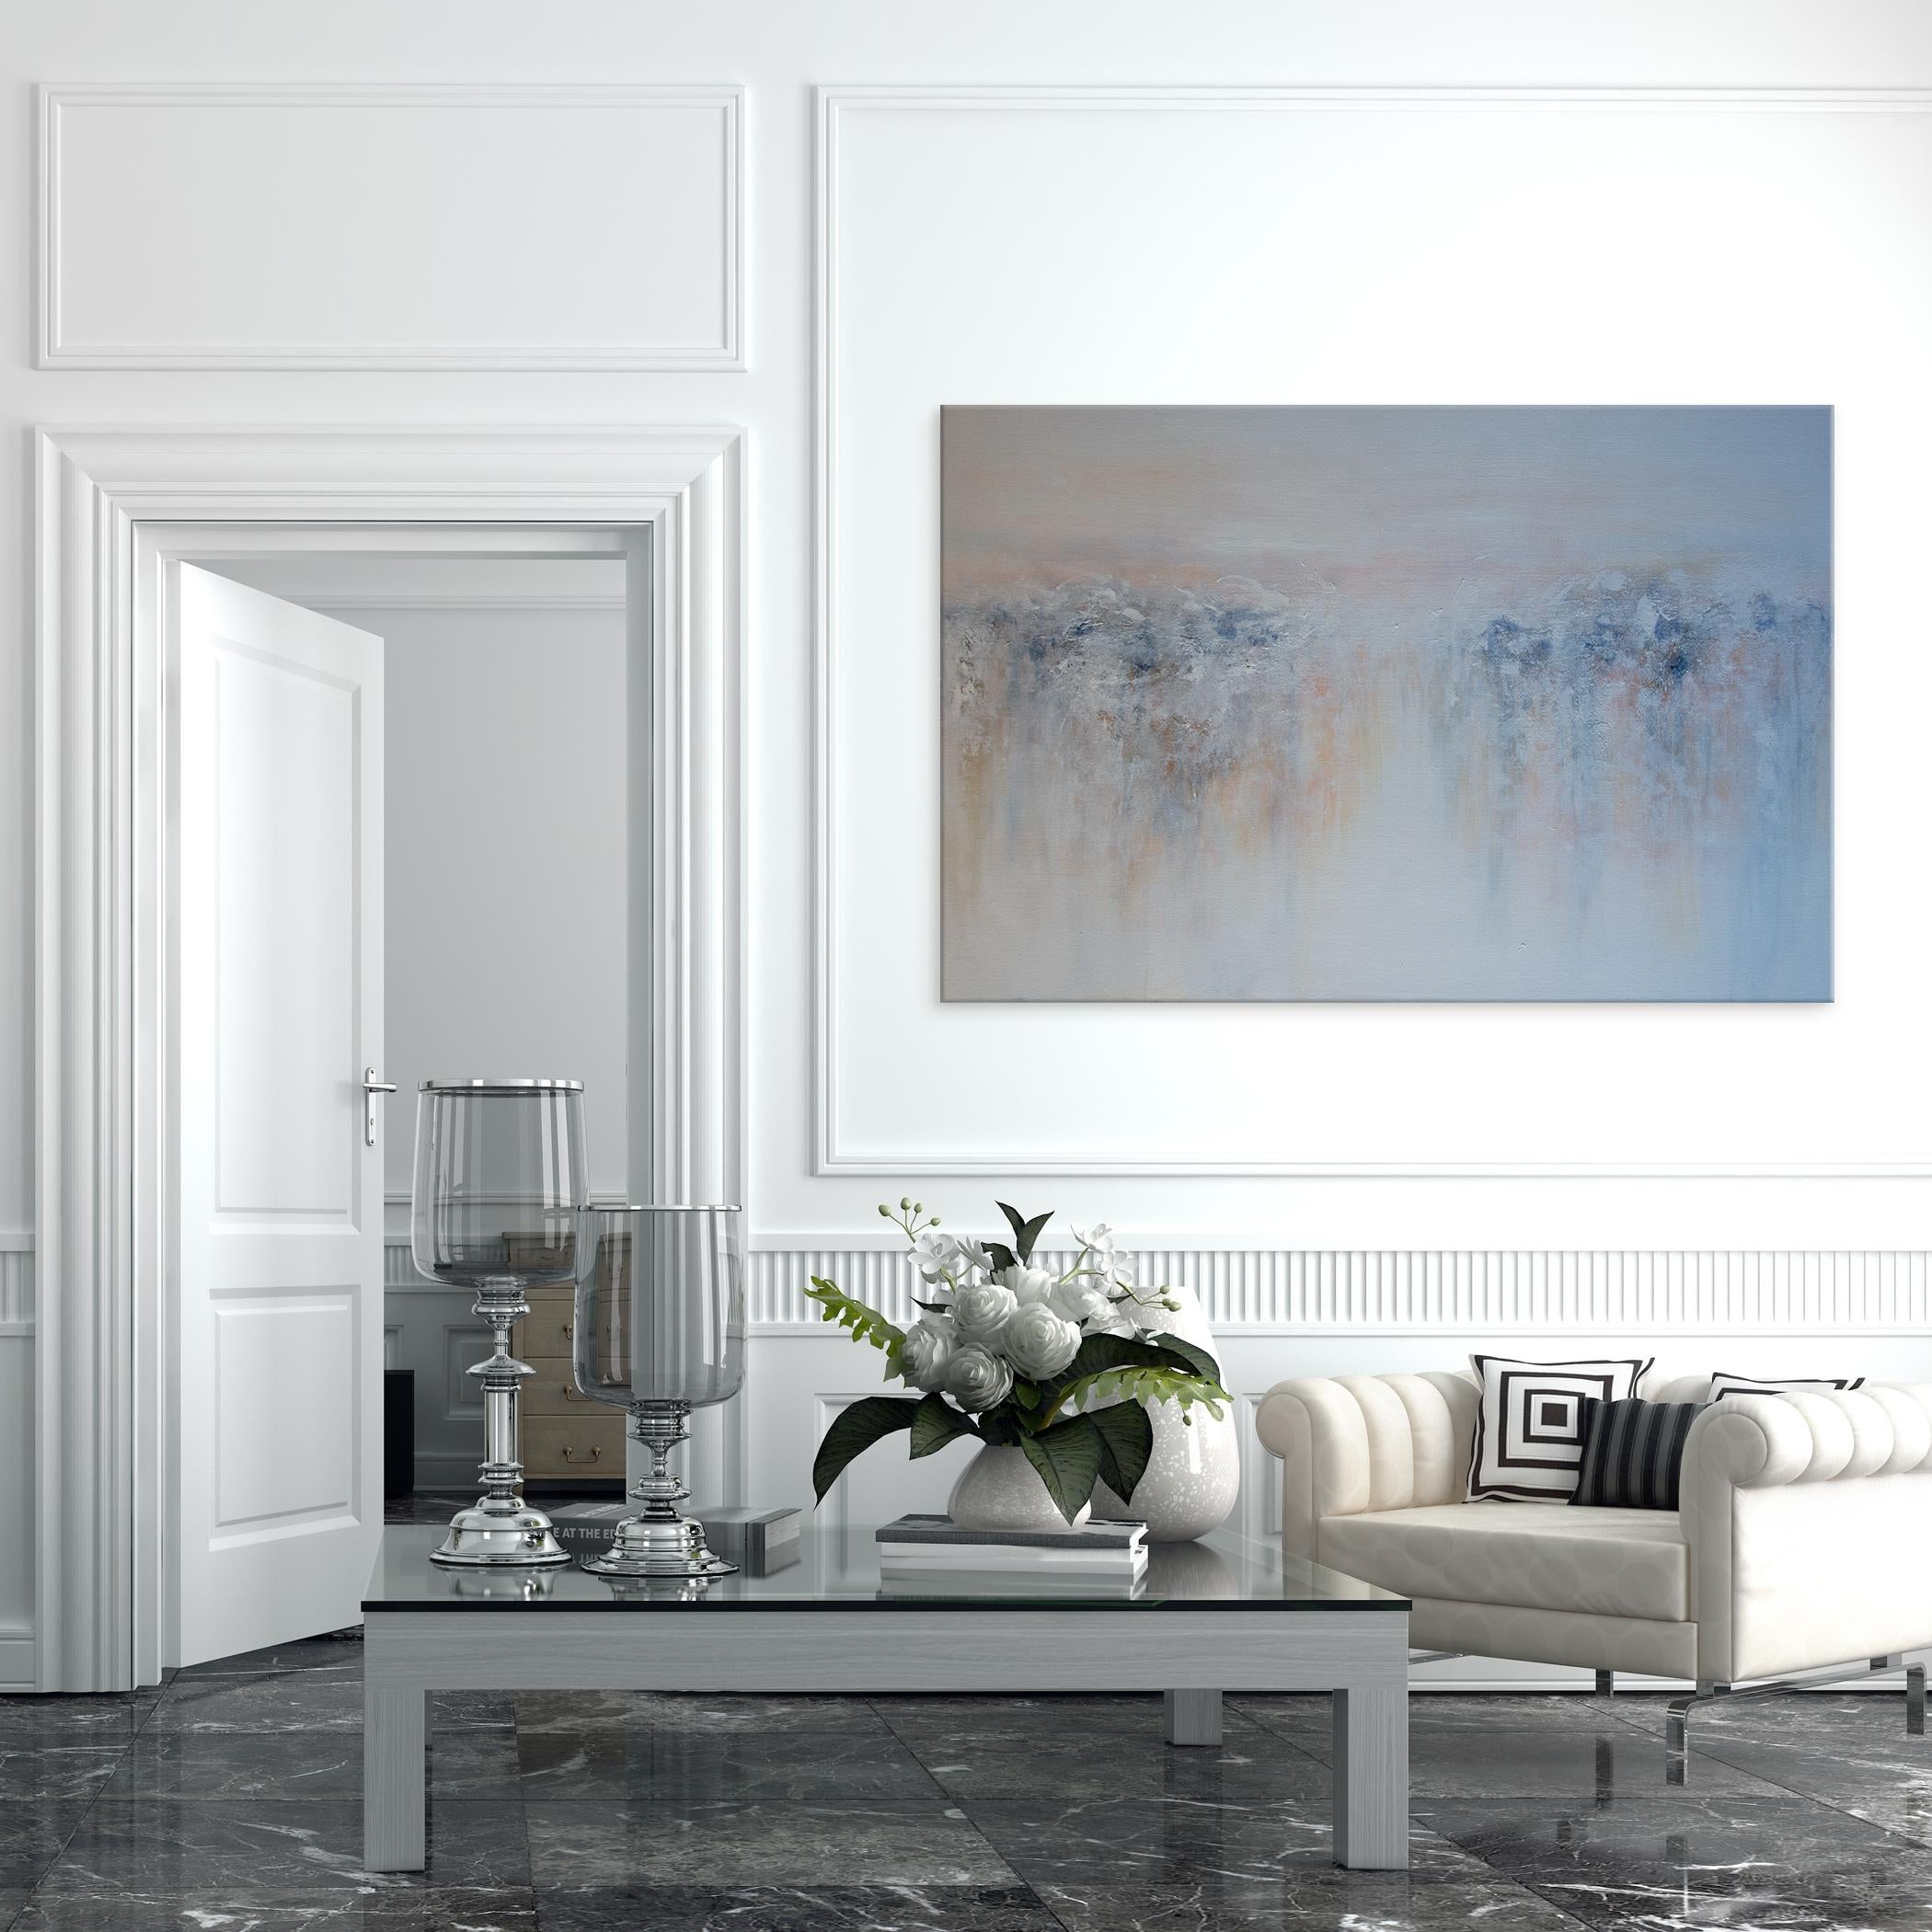 Enhance your space with this abstract expressionist painting, 'September' by Karen Moehr. An artist with a keen ability to create captivating works of art using minimal design elements. Known for bold brush strokes and soothing color palettes, her